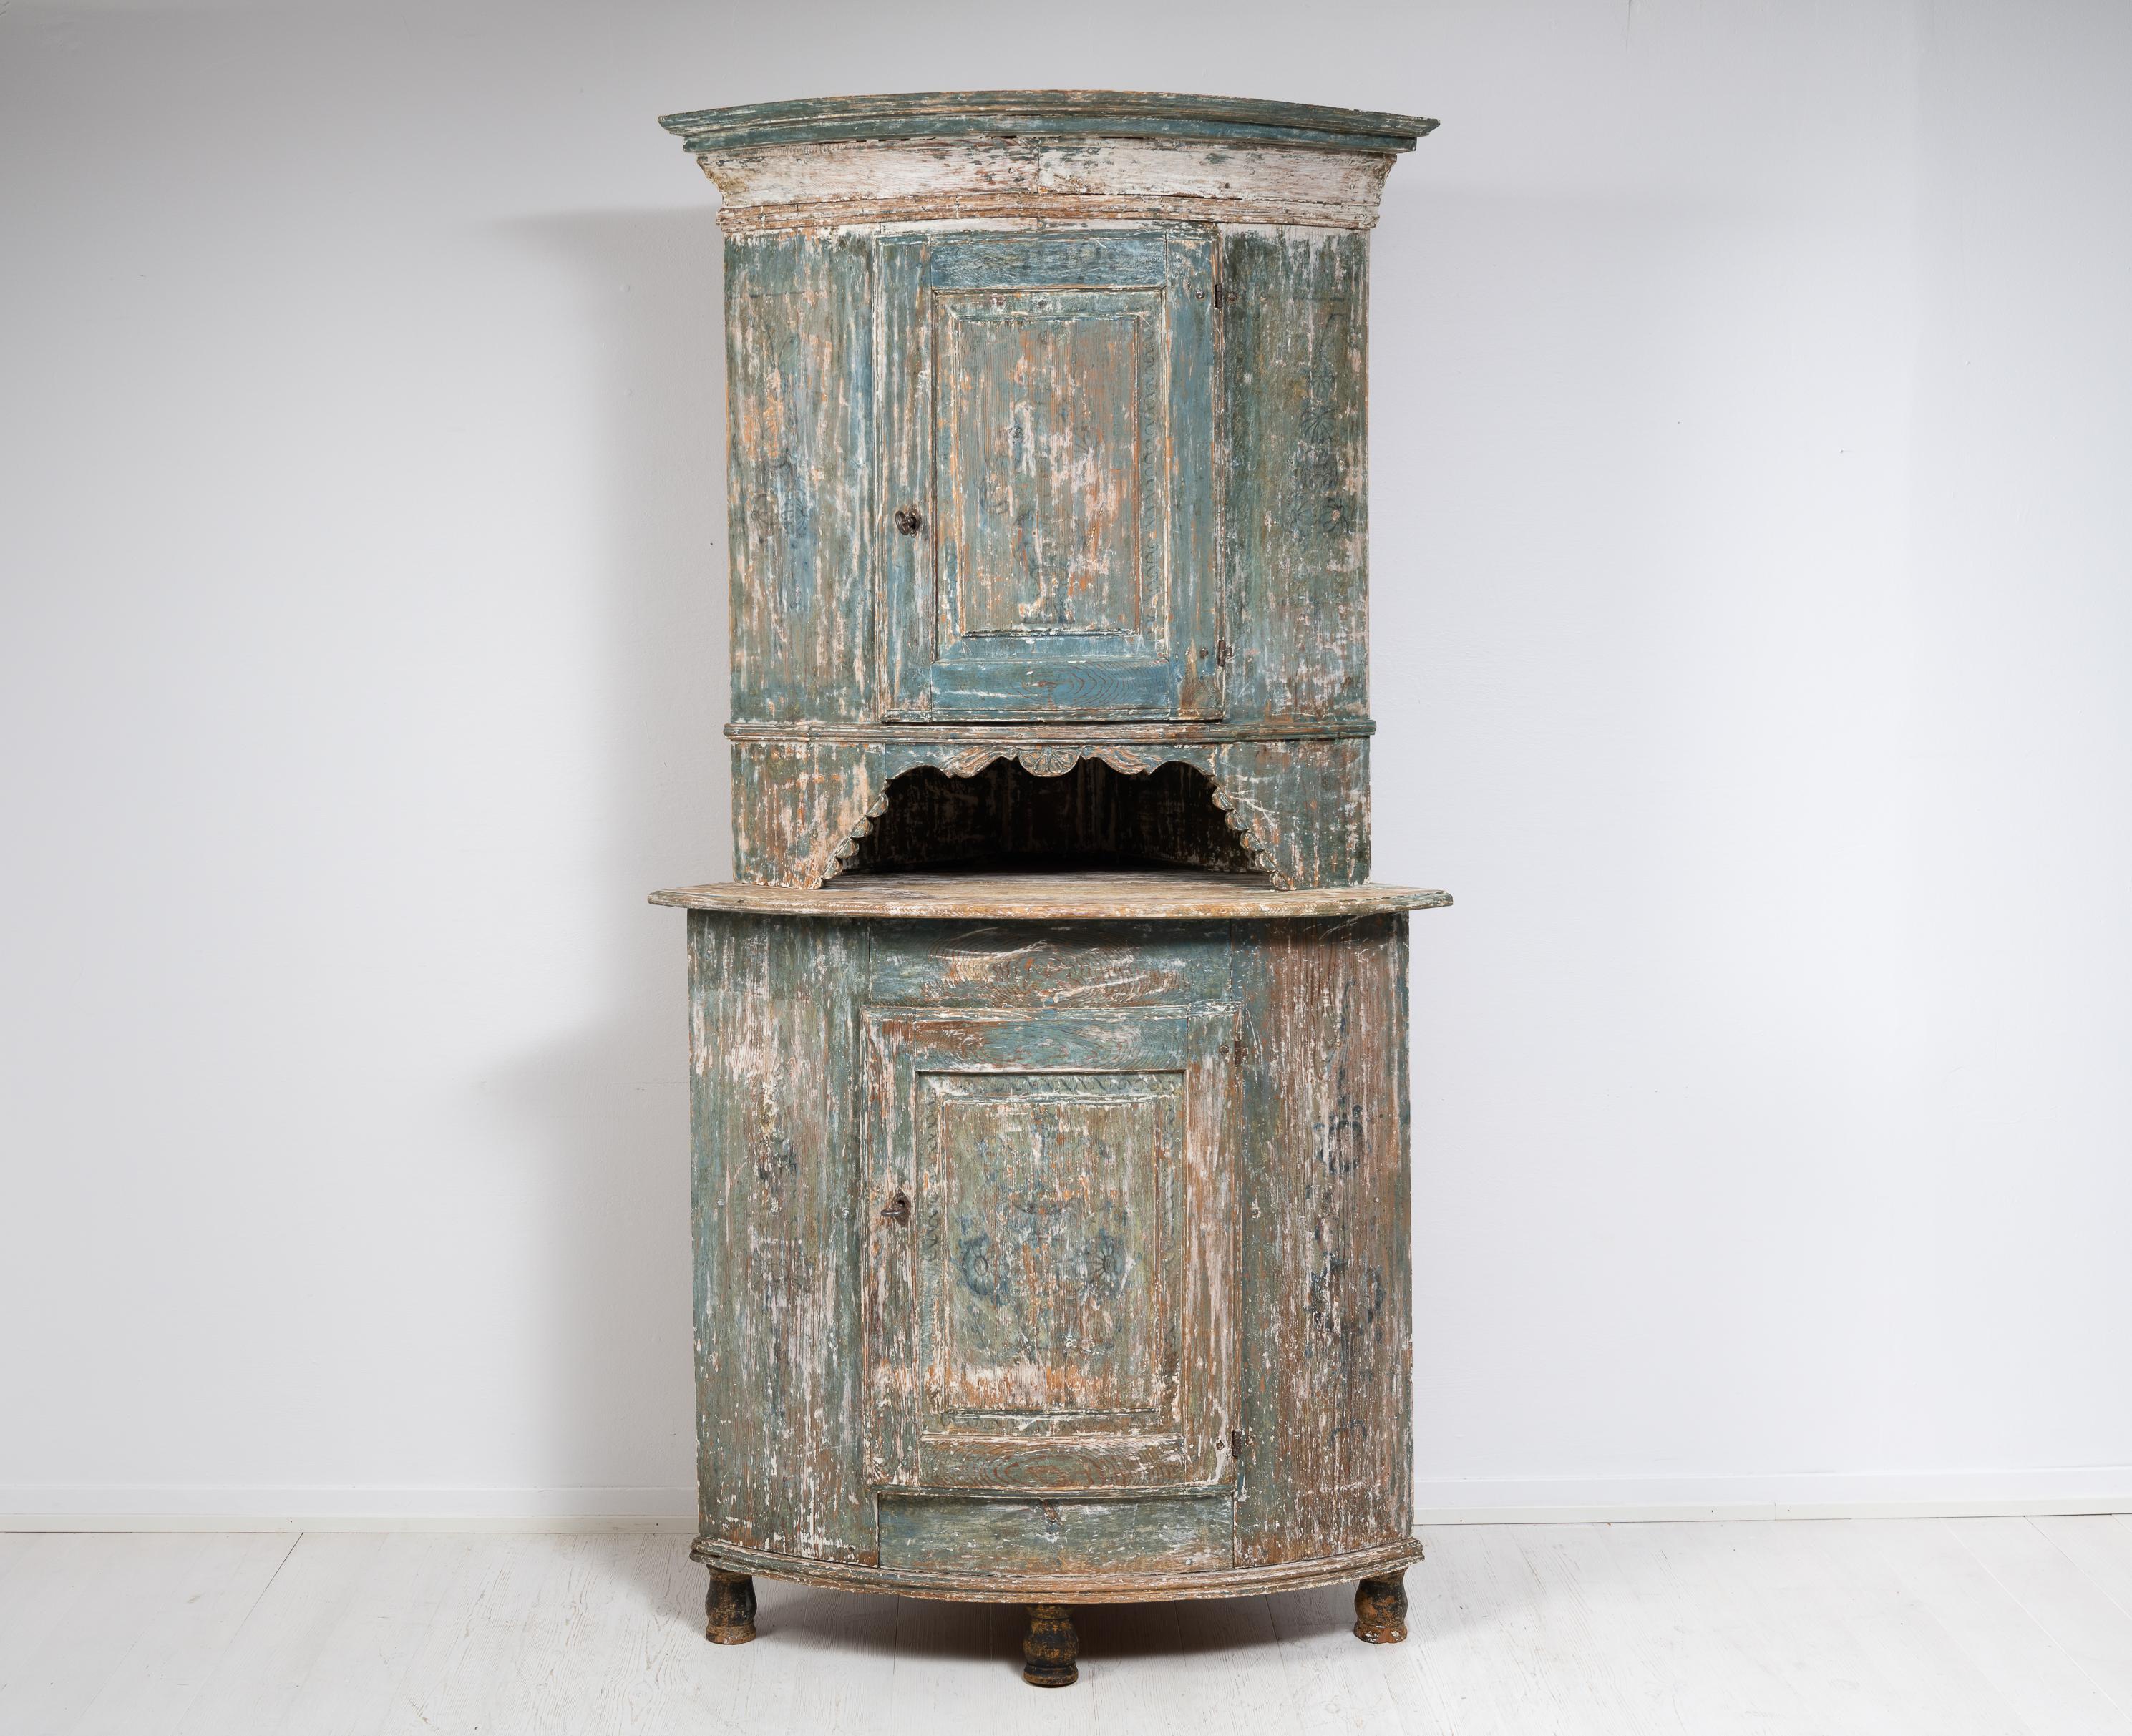 Swedish country house corner cabinet from northern Sweden. The cabinet is a Swedish country home furniture from the first half of the 19th century, circa 1820 to 1840. Made in painted pine with traces of the original paint. The cabinet has distinct